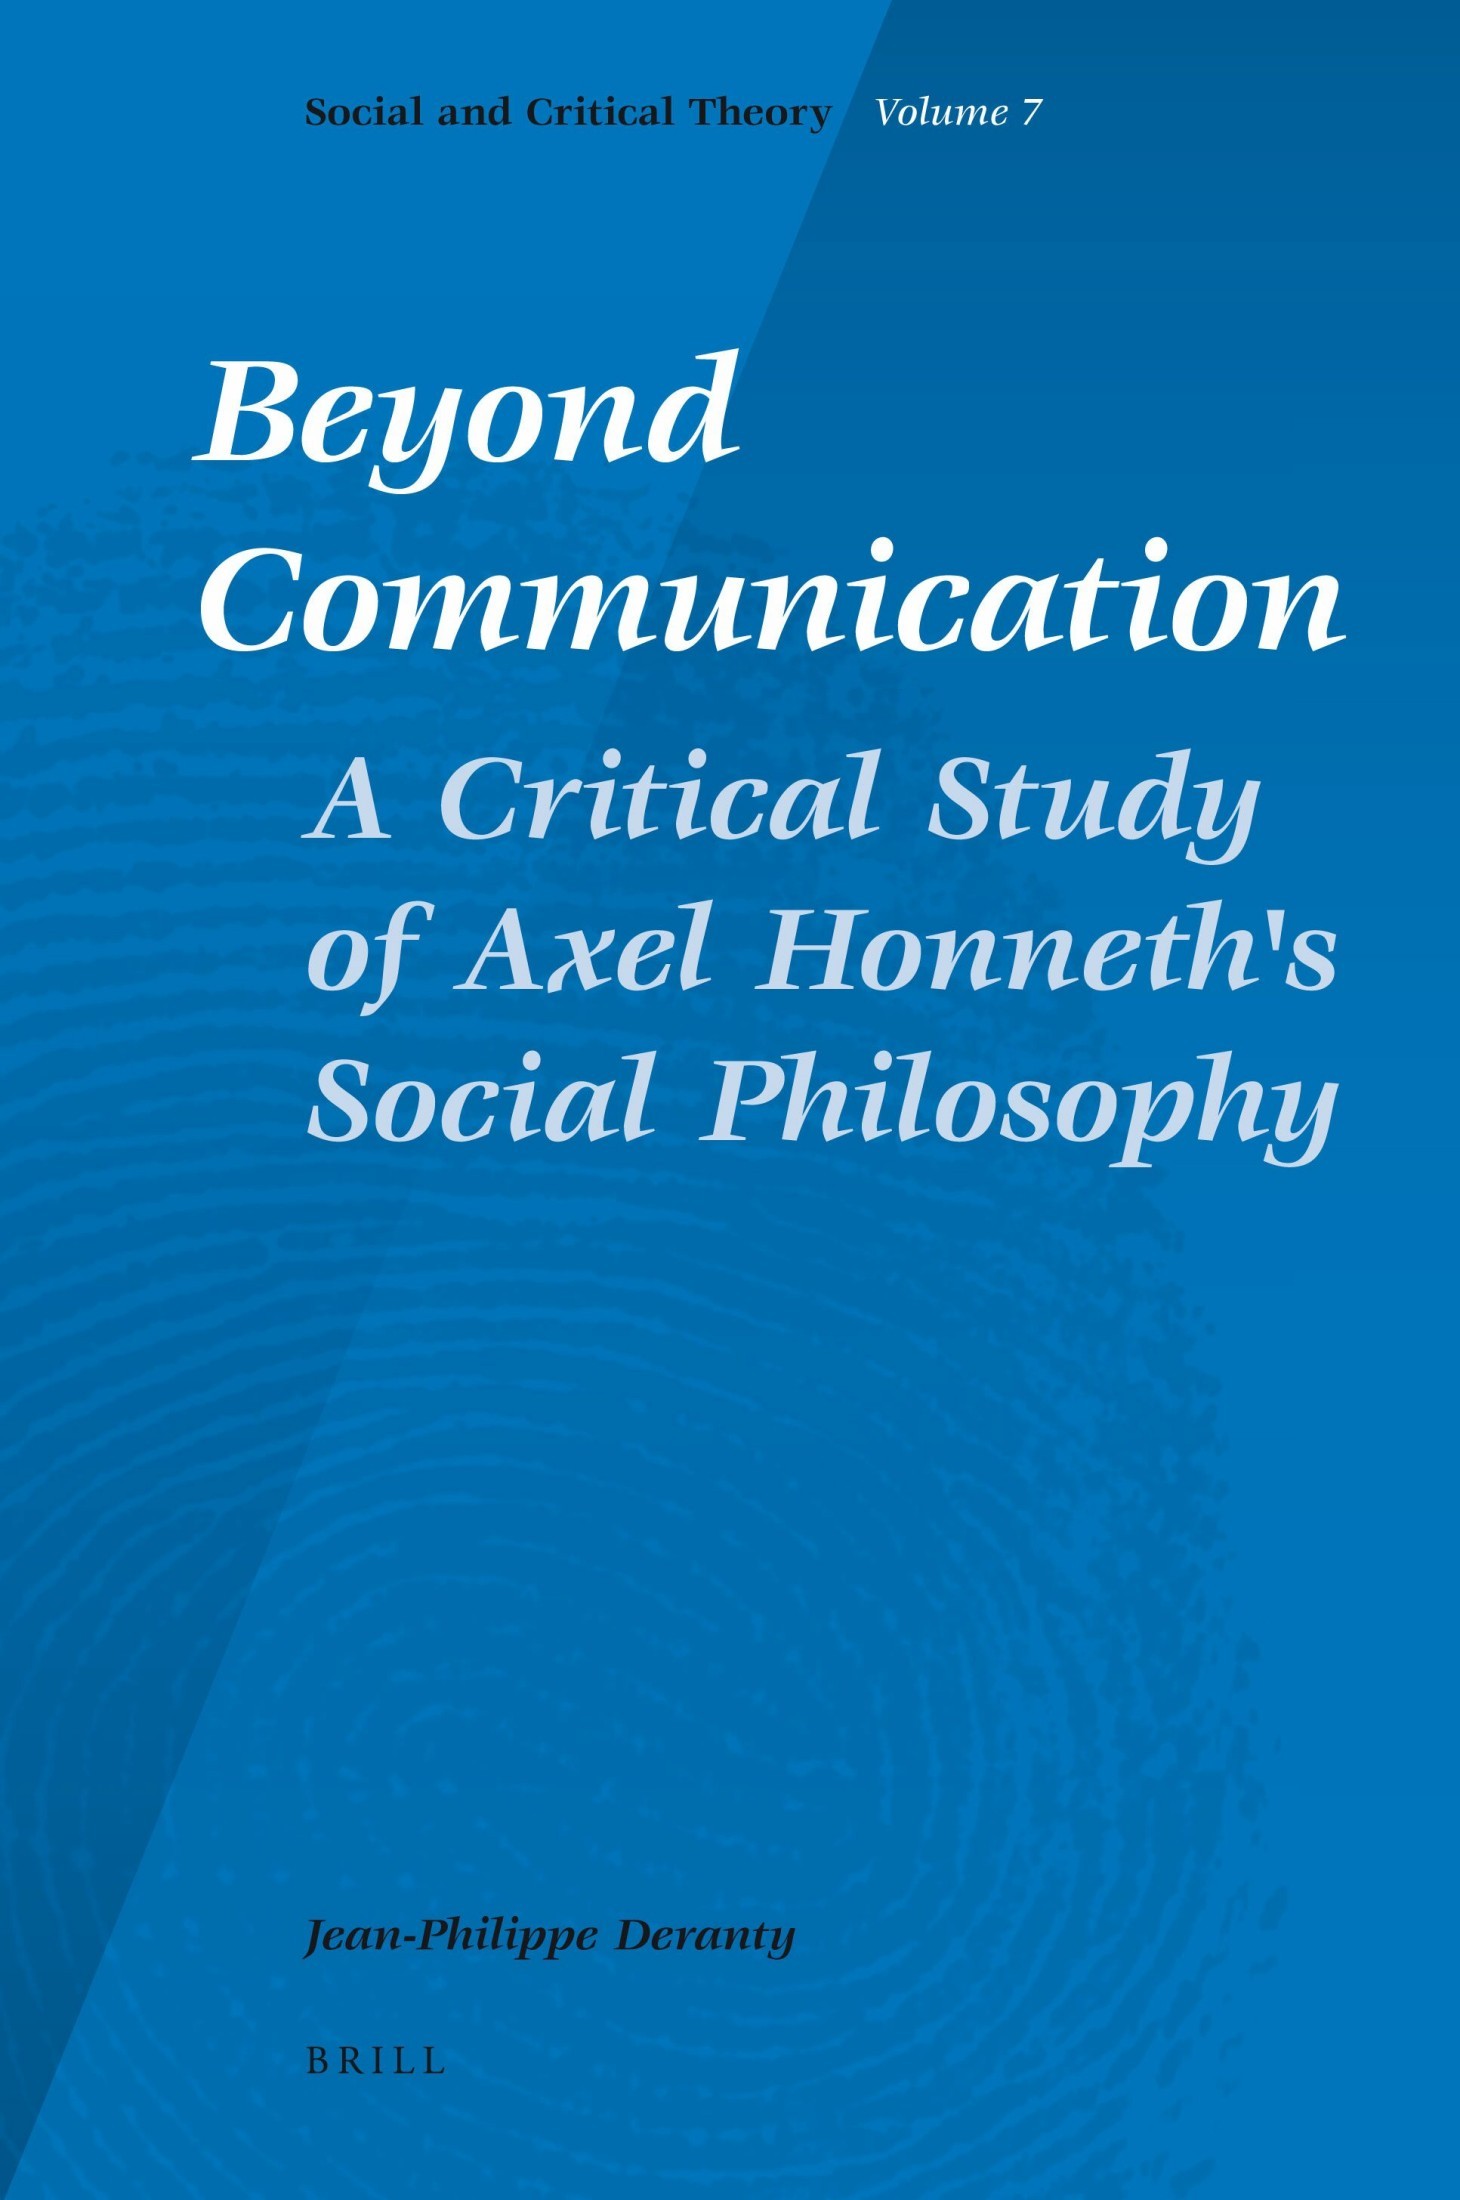 Beyond Communication: A Critical Study of Axel Honneth's Social Philosophy